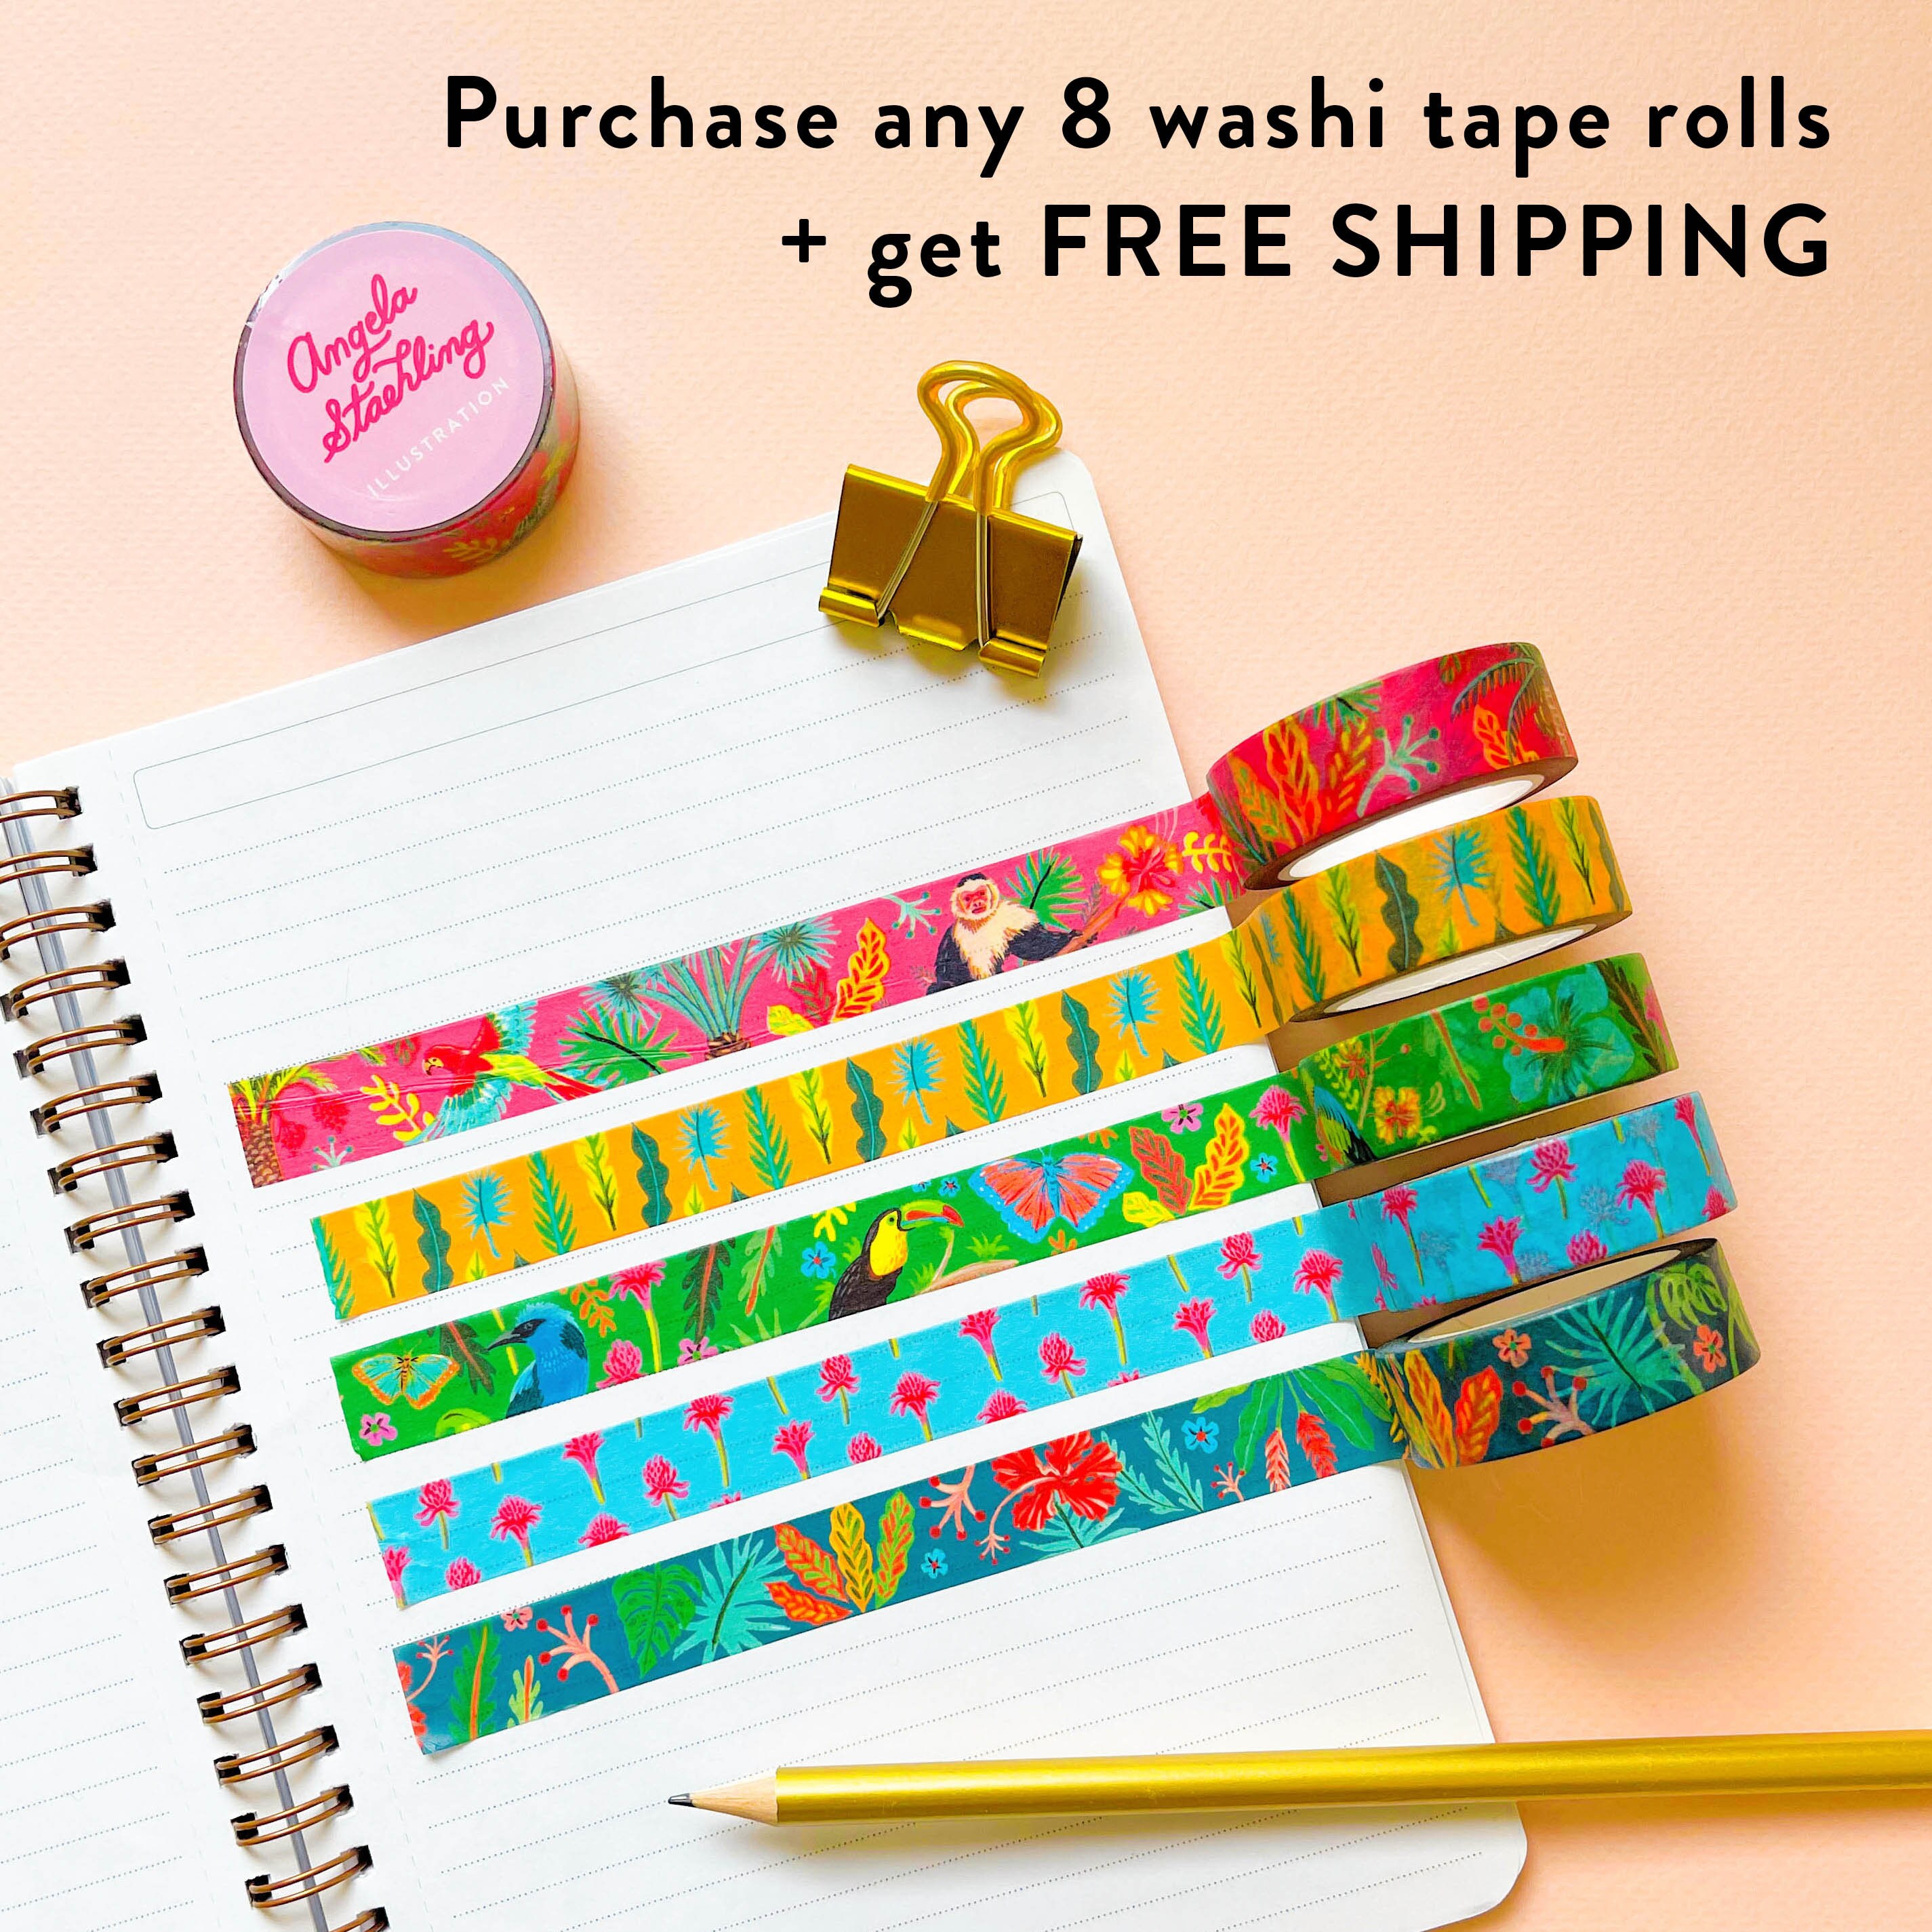 JOLLY HOLIDAY Festive Christmas Washi Tape 20mm/10m Holiday Paper